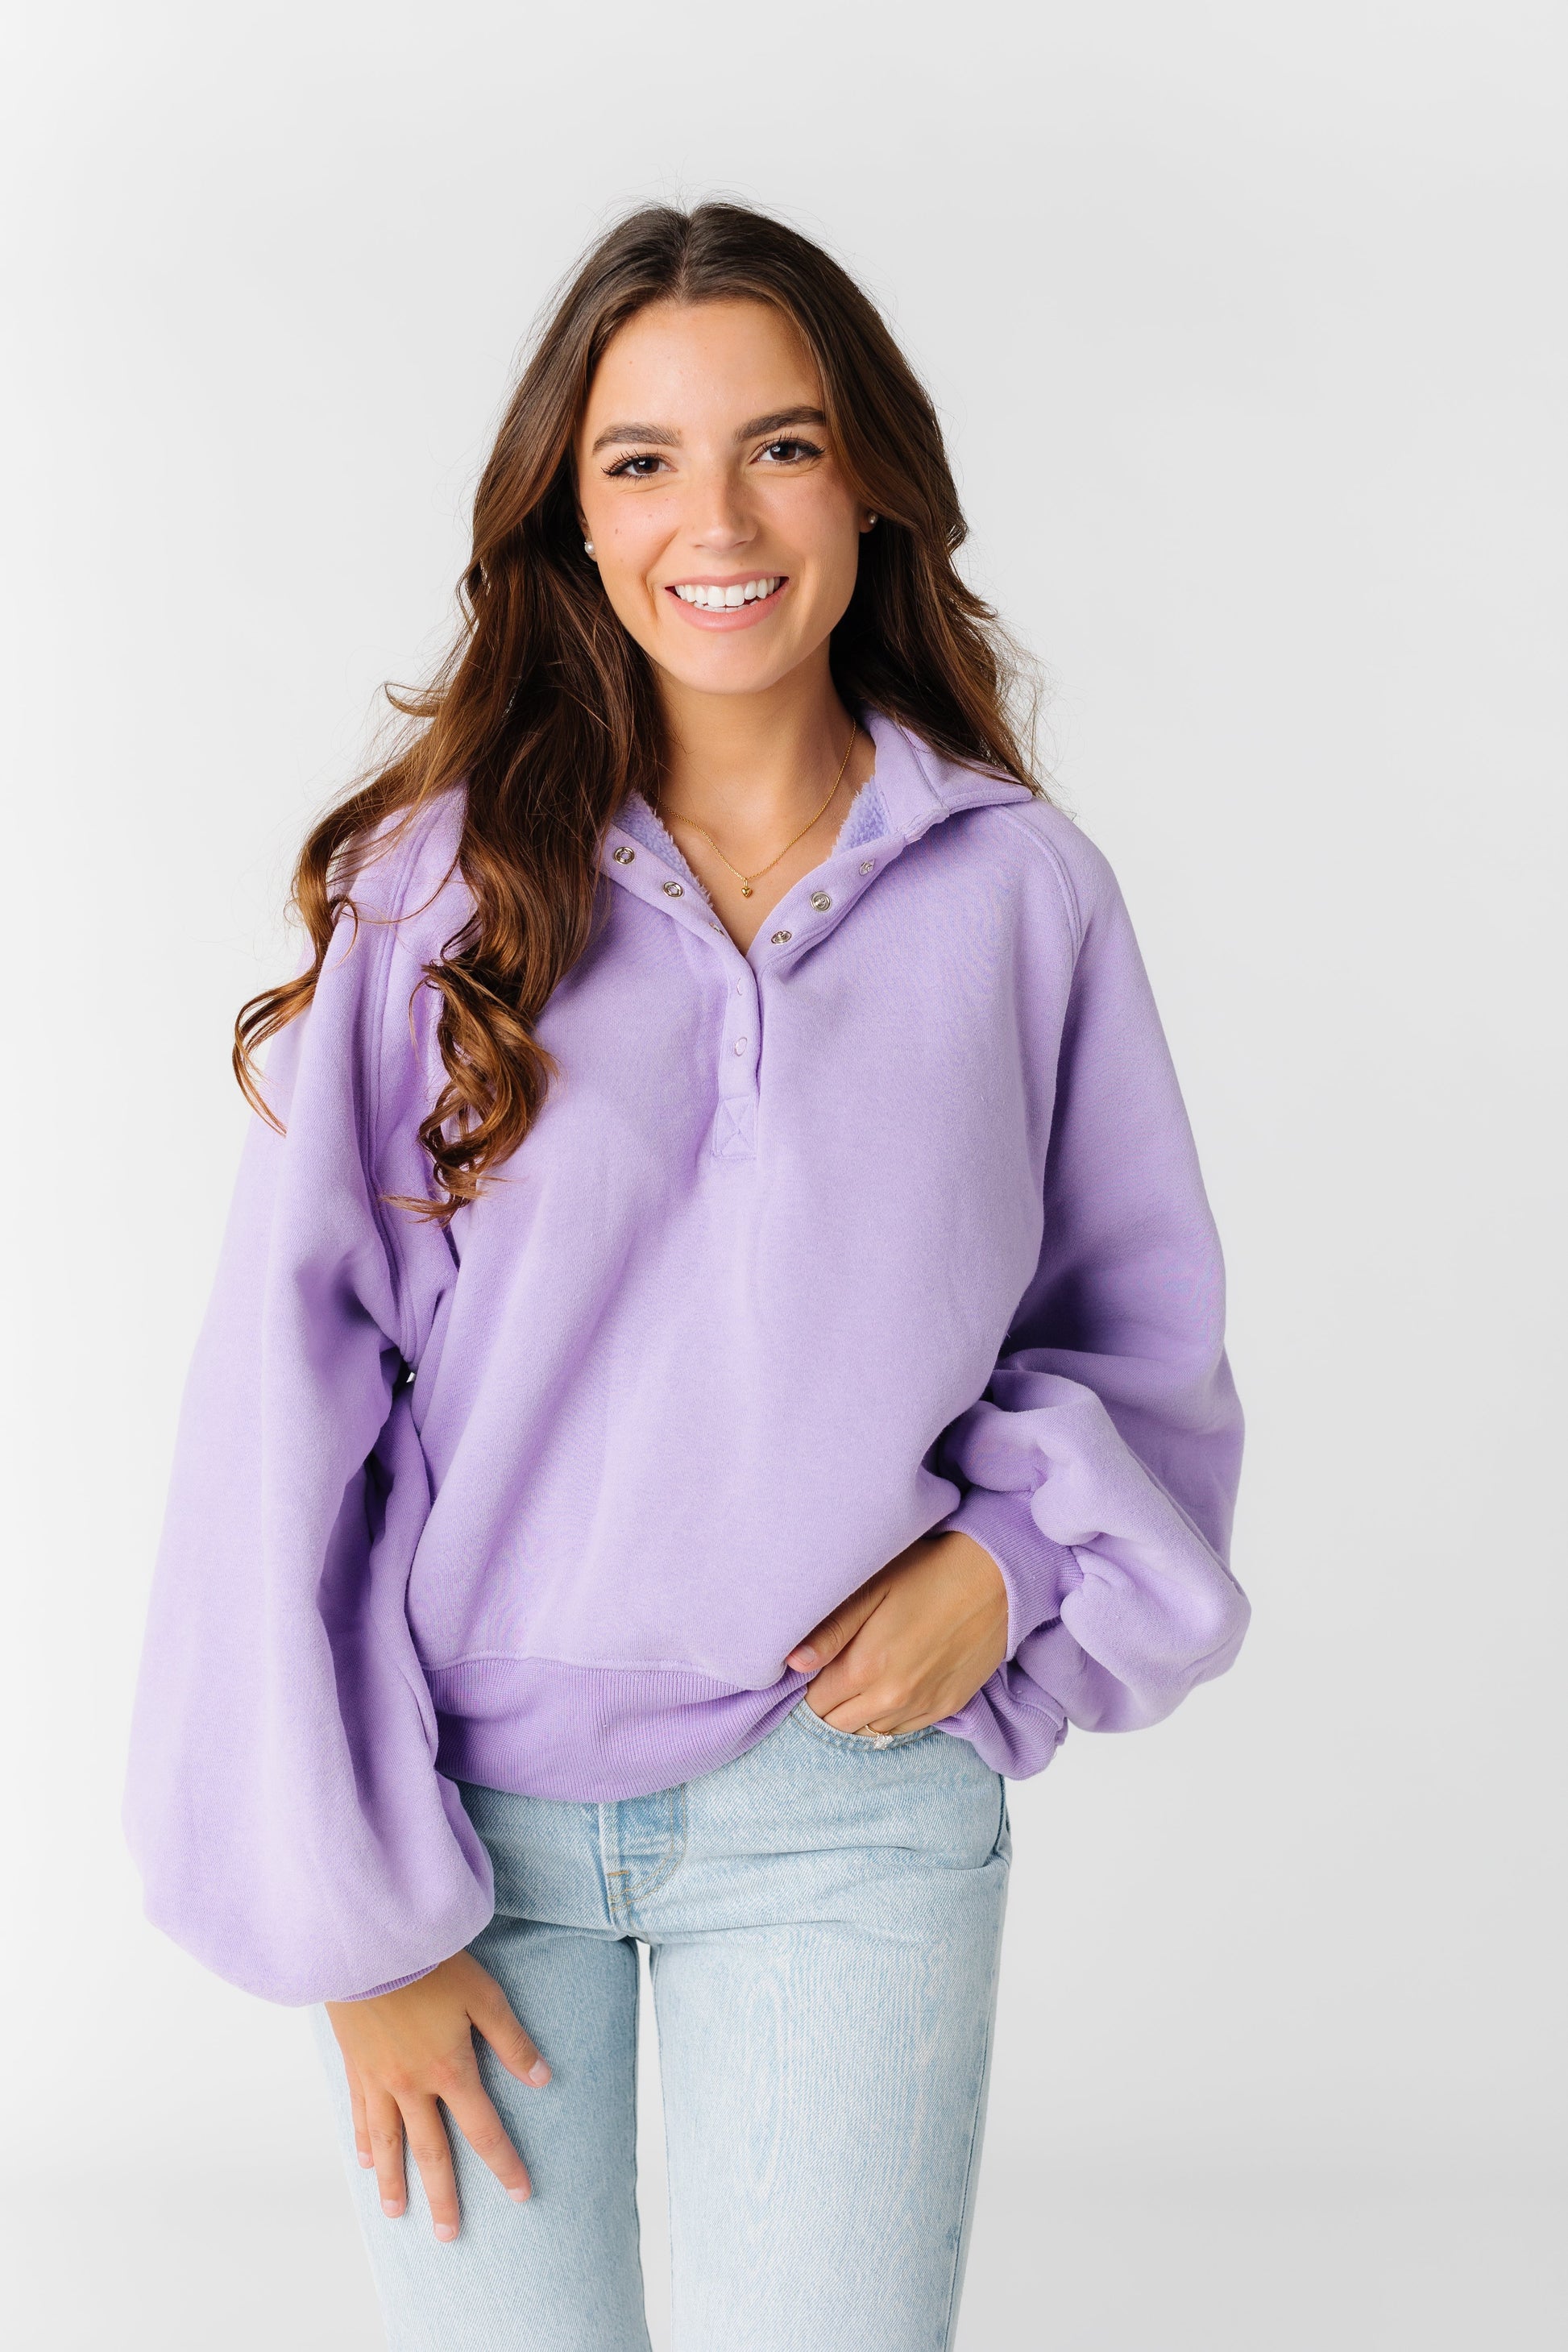 Moon Collared Sweater - New WOMEN'S SWEATERS Paper Moon Lavender L 